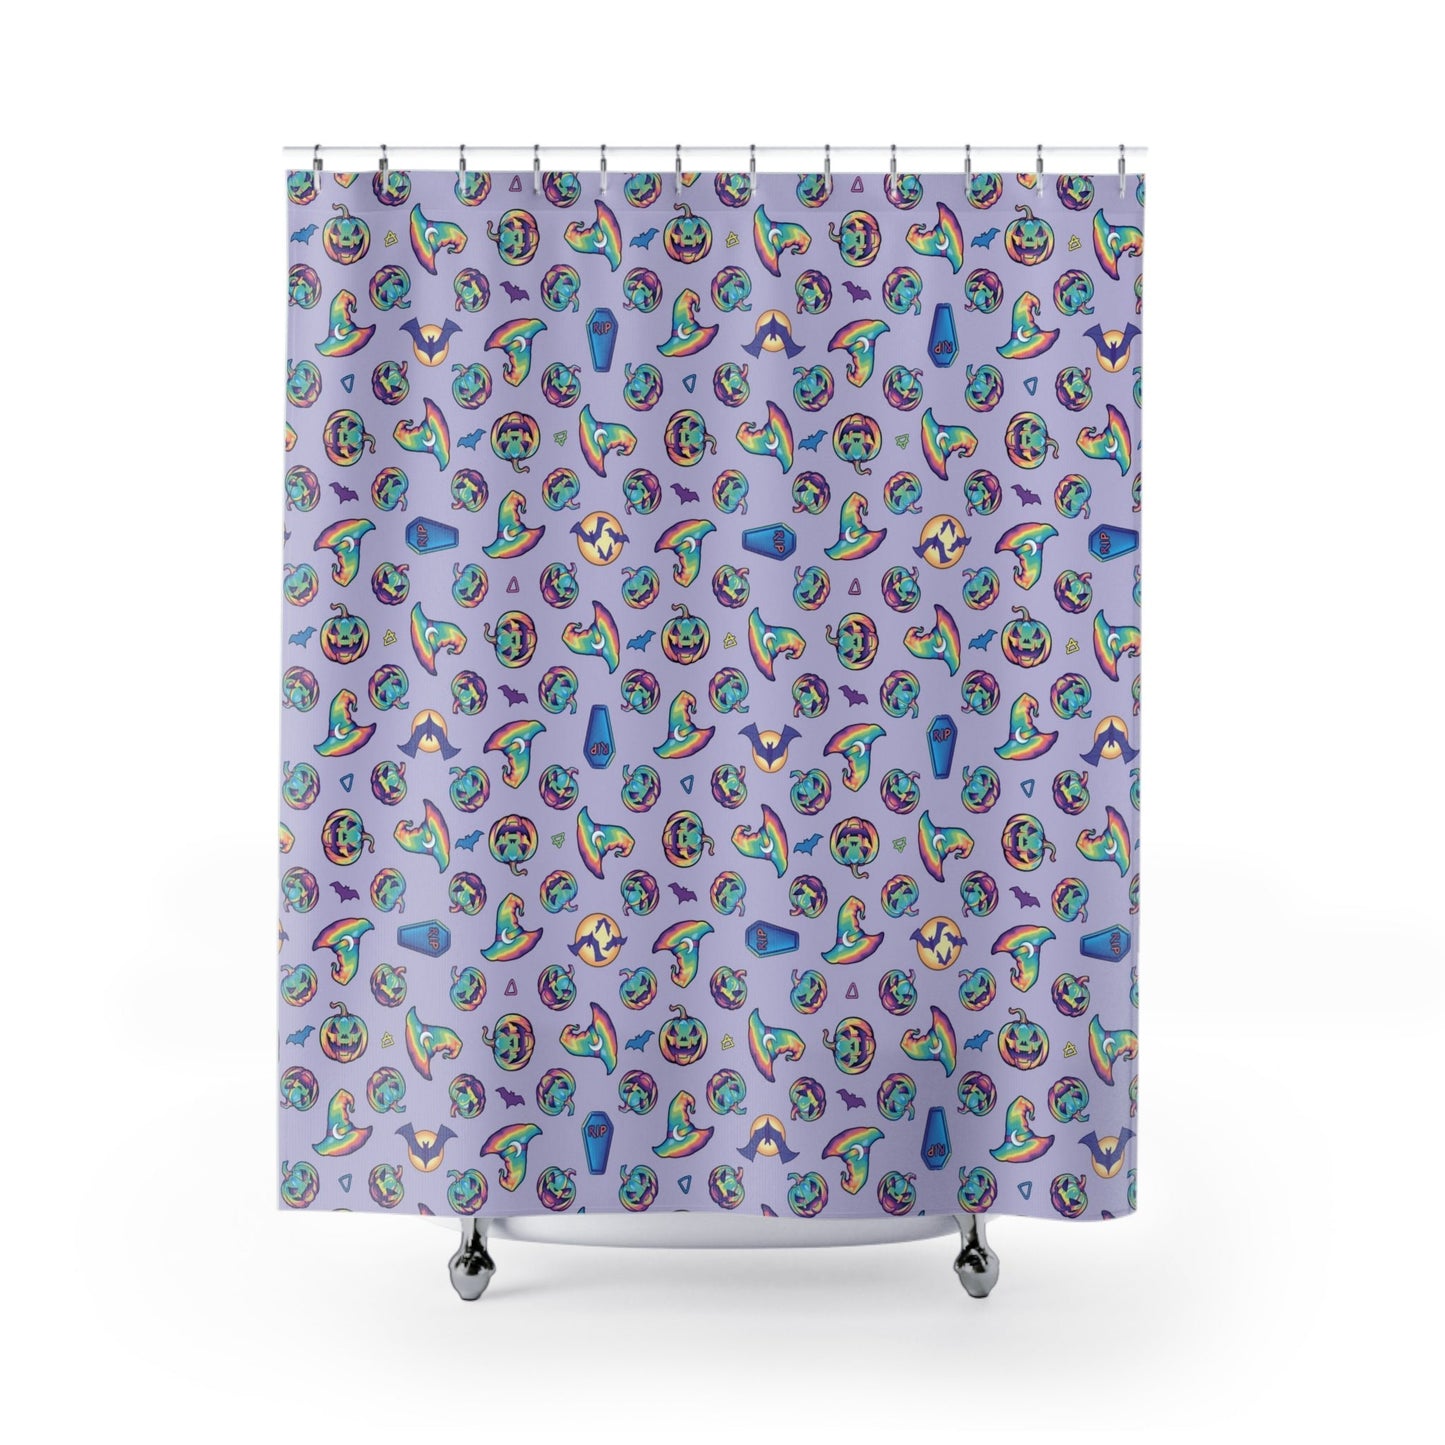 Jack-o’-Lanterns, Bats & Witch Hats Shower Curtain - Violet - Driftless Enchantments